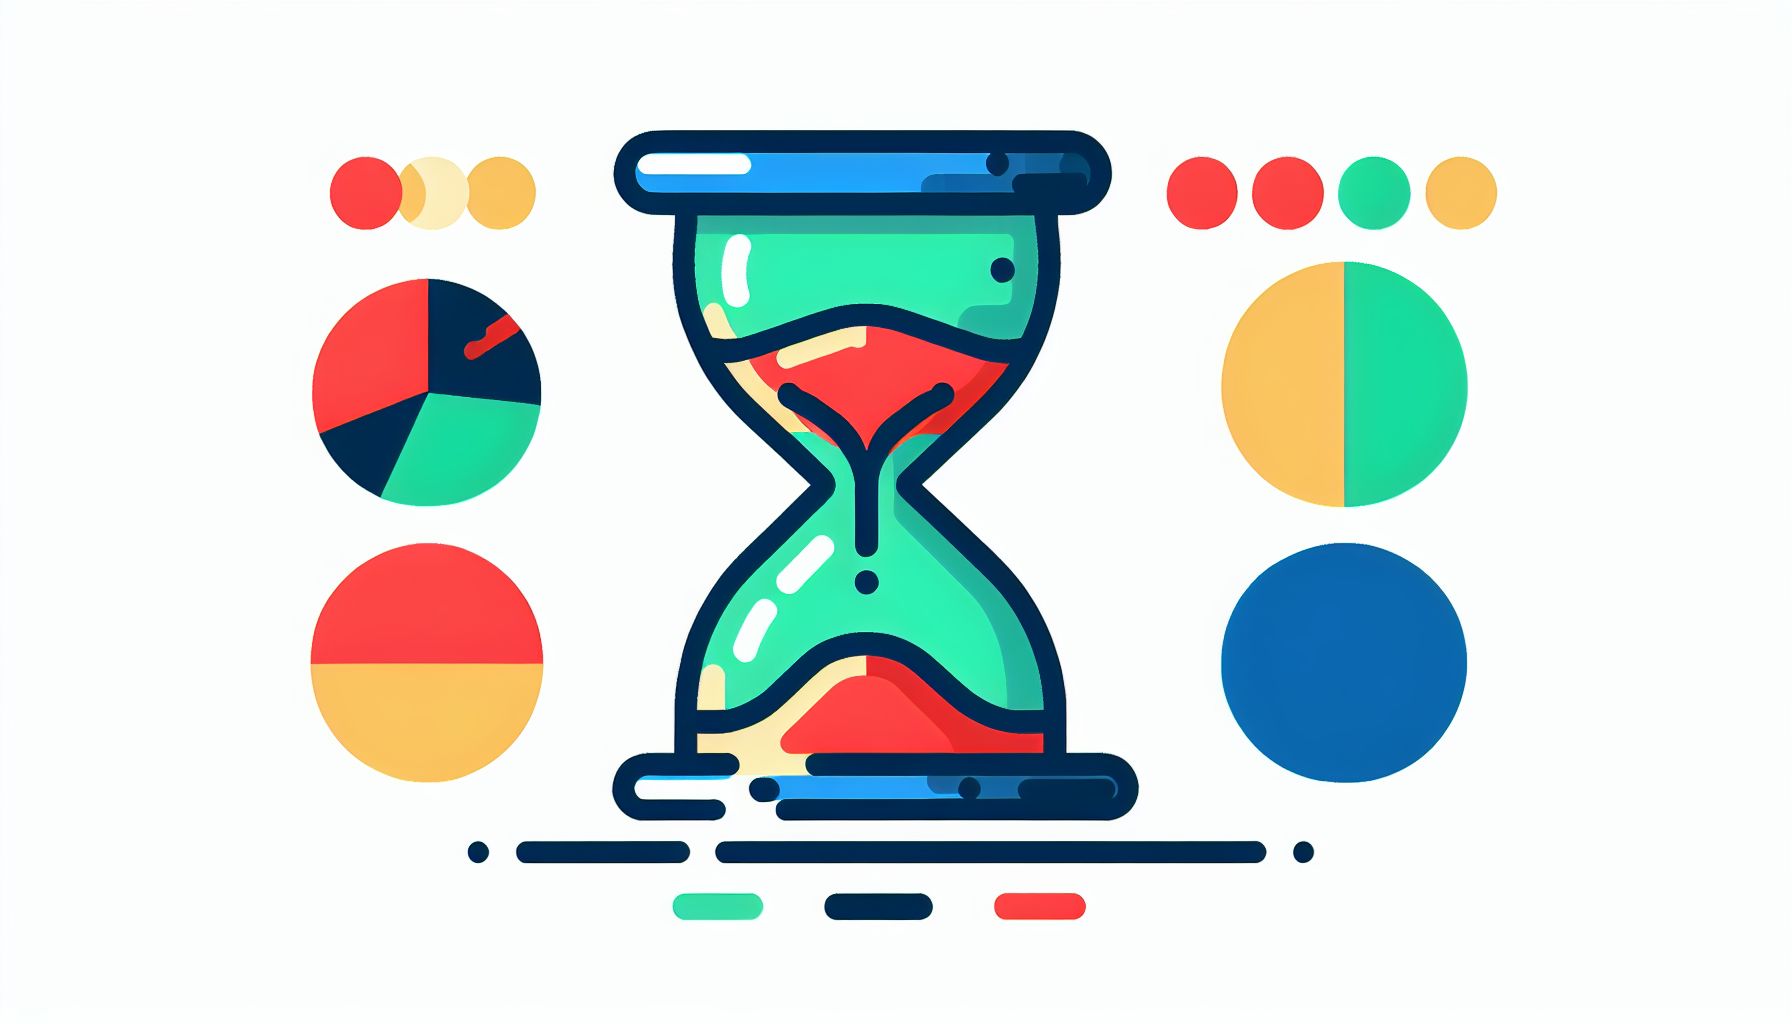 Hourglass in flat illustration style and white background, red #f47574, green #88c7a8, yellow #fcc44b, and blue #645bc8 colors.